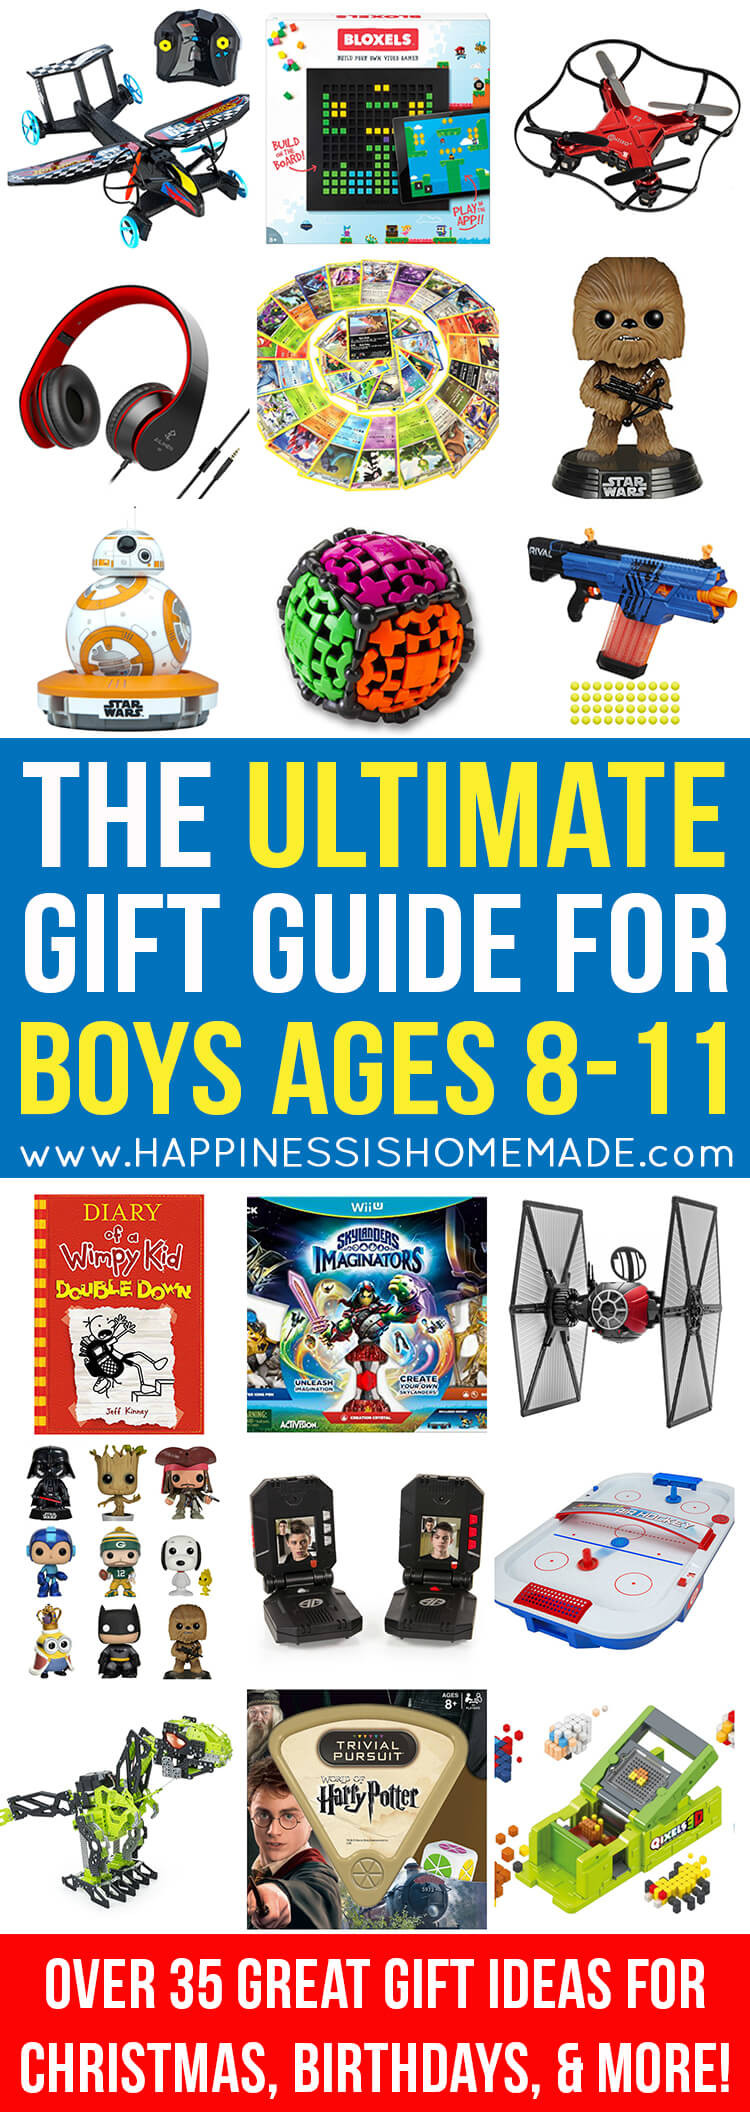 Christmas Gift Ideas For 10 Year Old Boy
 The Best Gift Ideas for Boys Ages 8 11 Happiness is Homemade